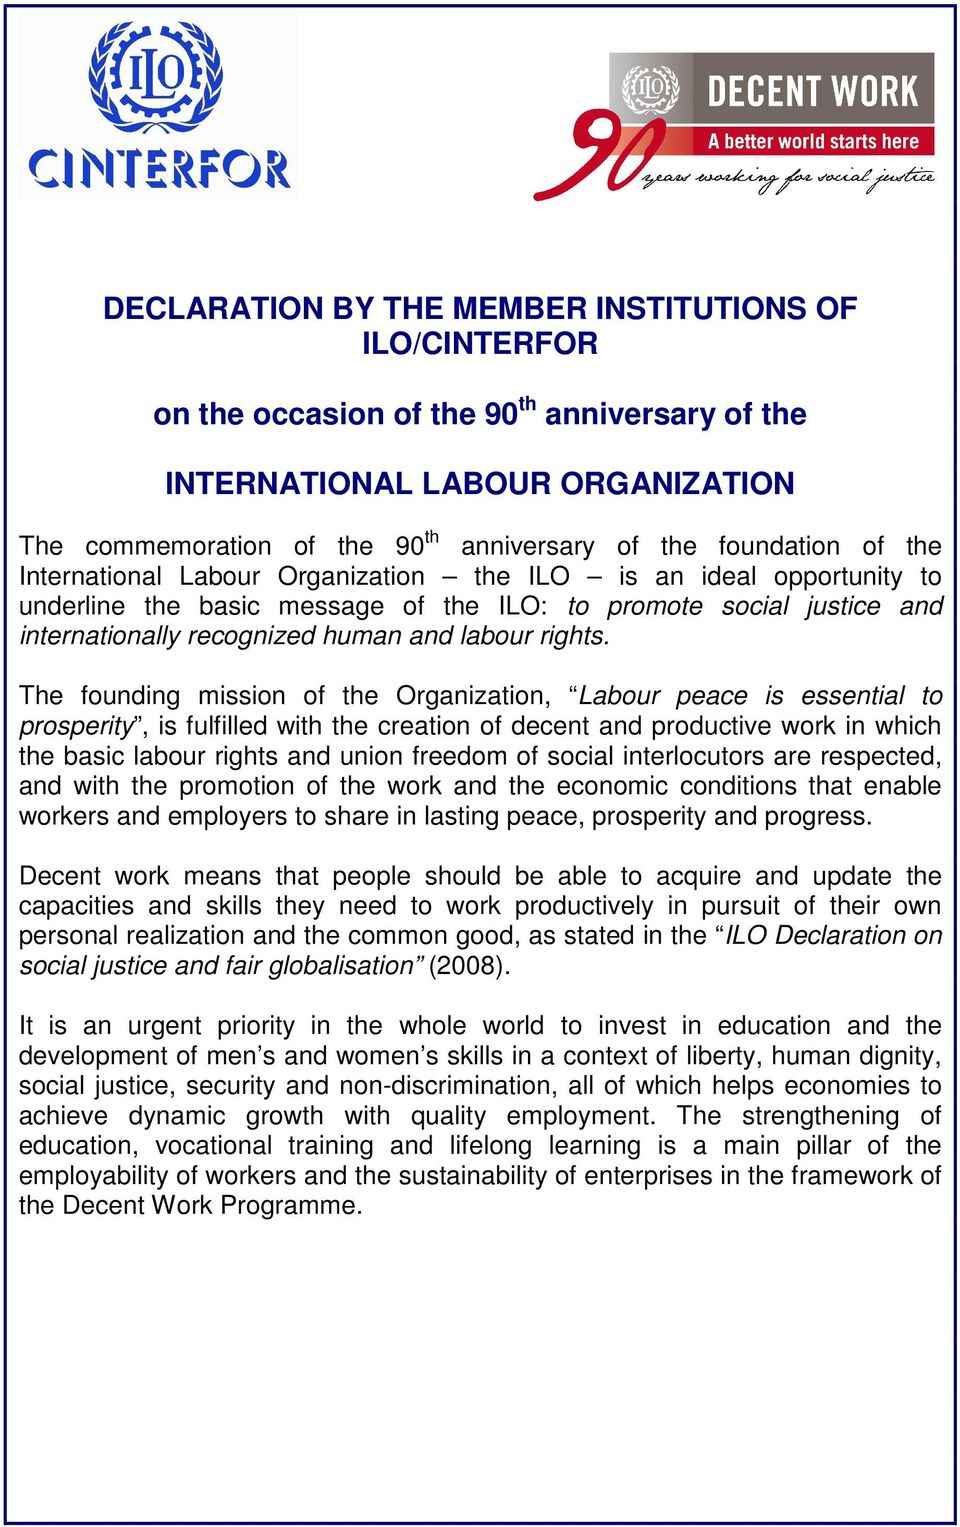 The founding mission of the Organization, Labour peace is essential to prosperity, is fulfilled with the creation of decent and productive work in which the basic labour rights and union freedom of